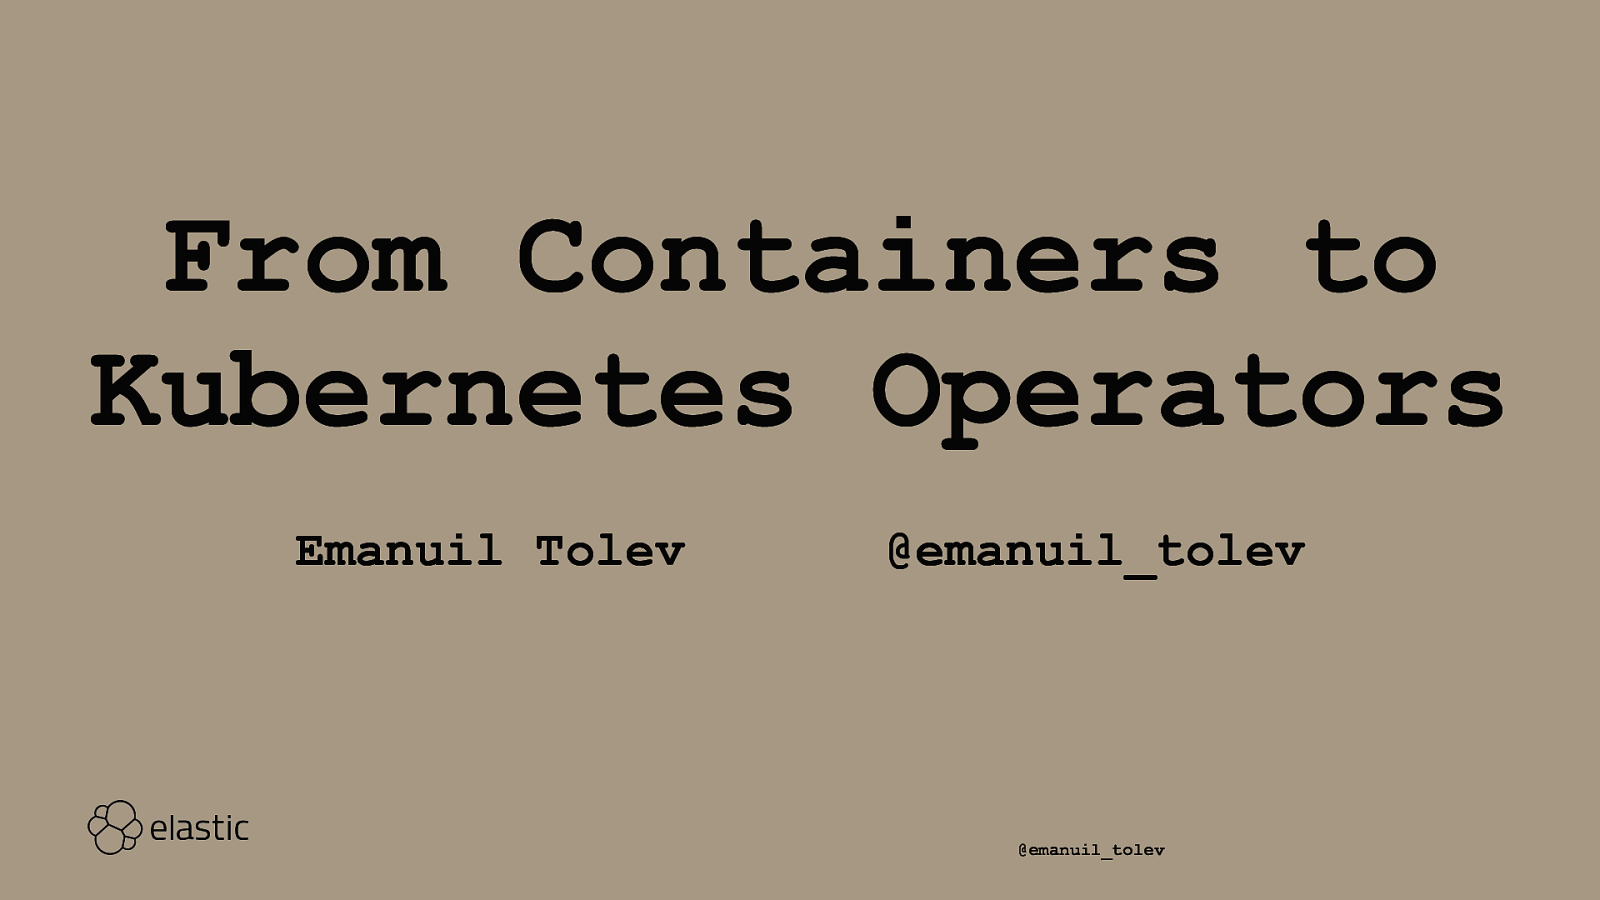 From Containers to Kubernetes Operators